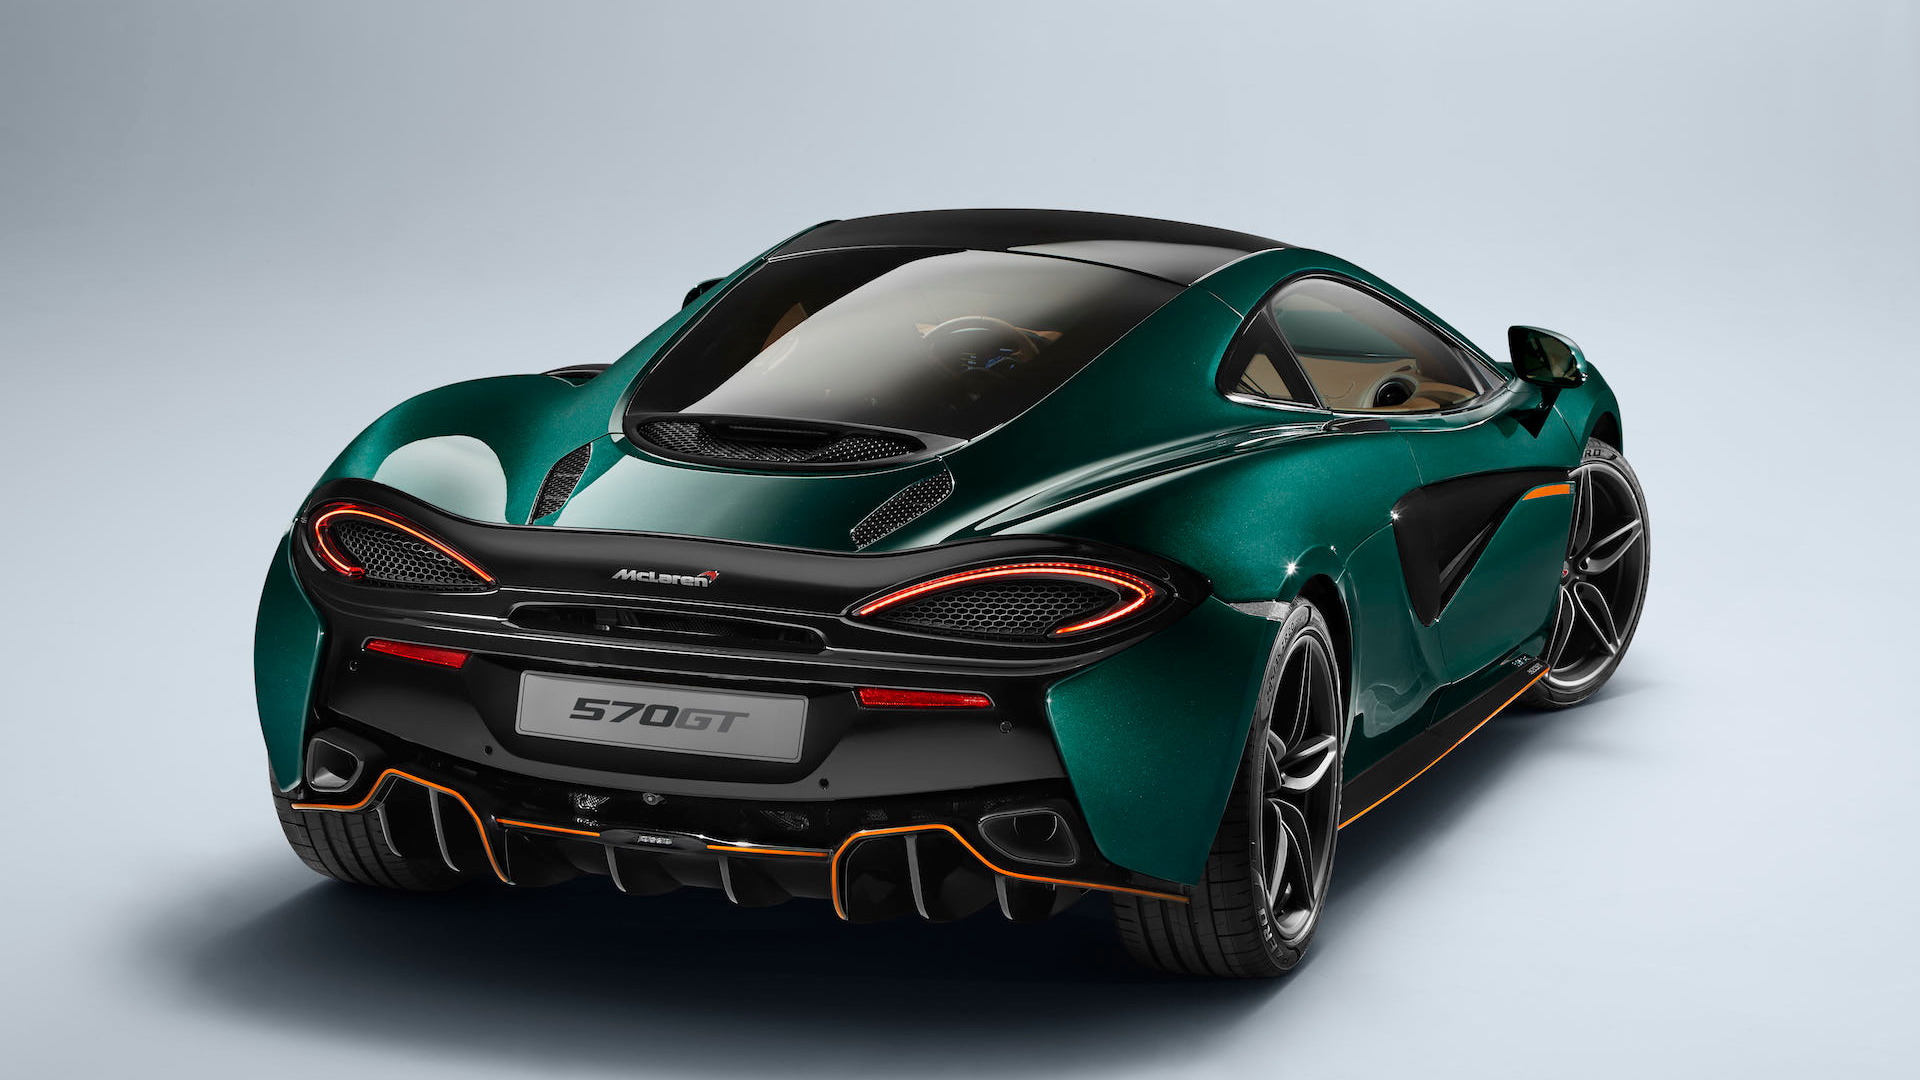 McLaren 570GT finished in XP Green